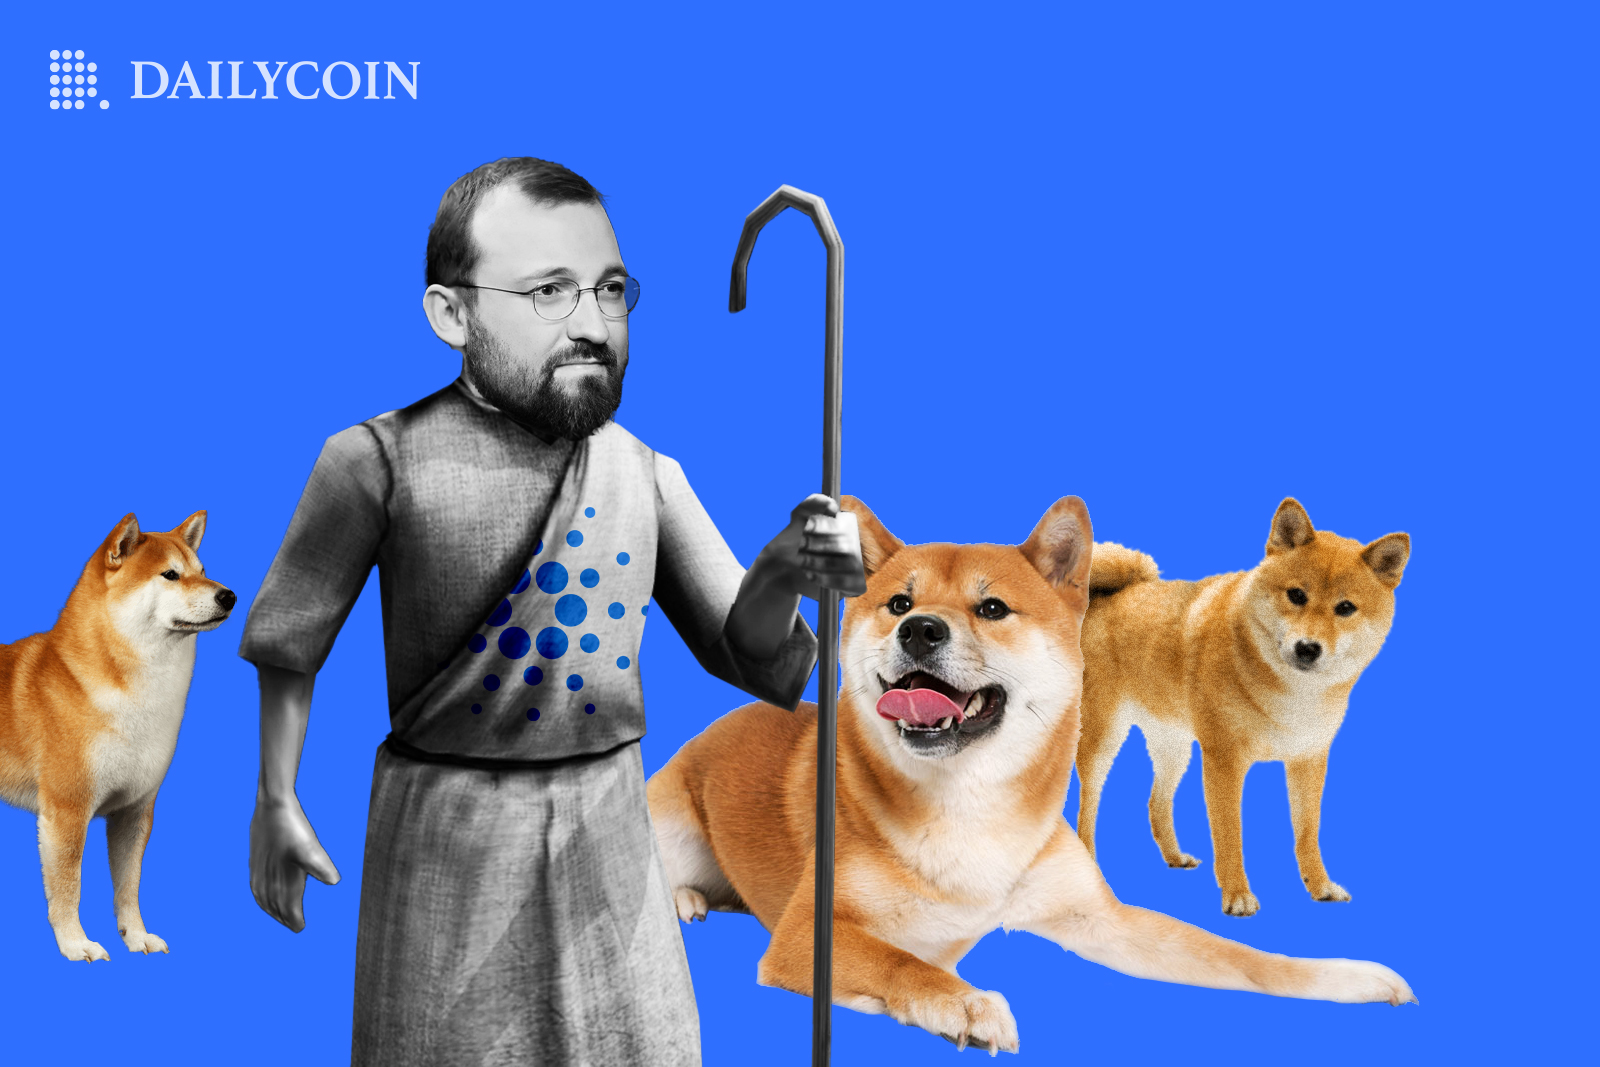 Charles Hoskinson Invites Dogecoin to Become a Sidechain of Cardano for Free